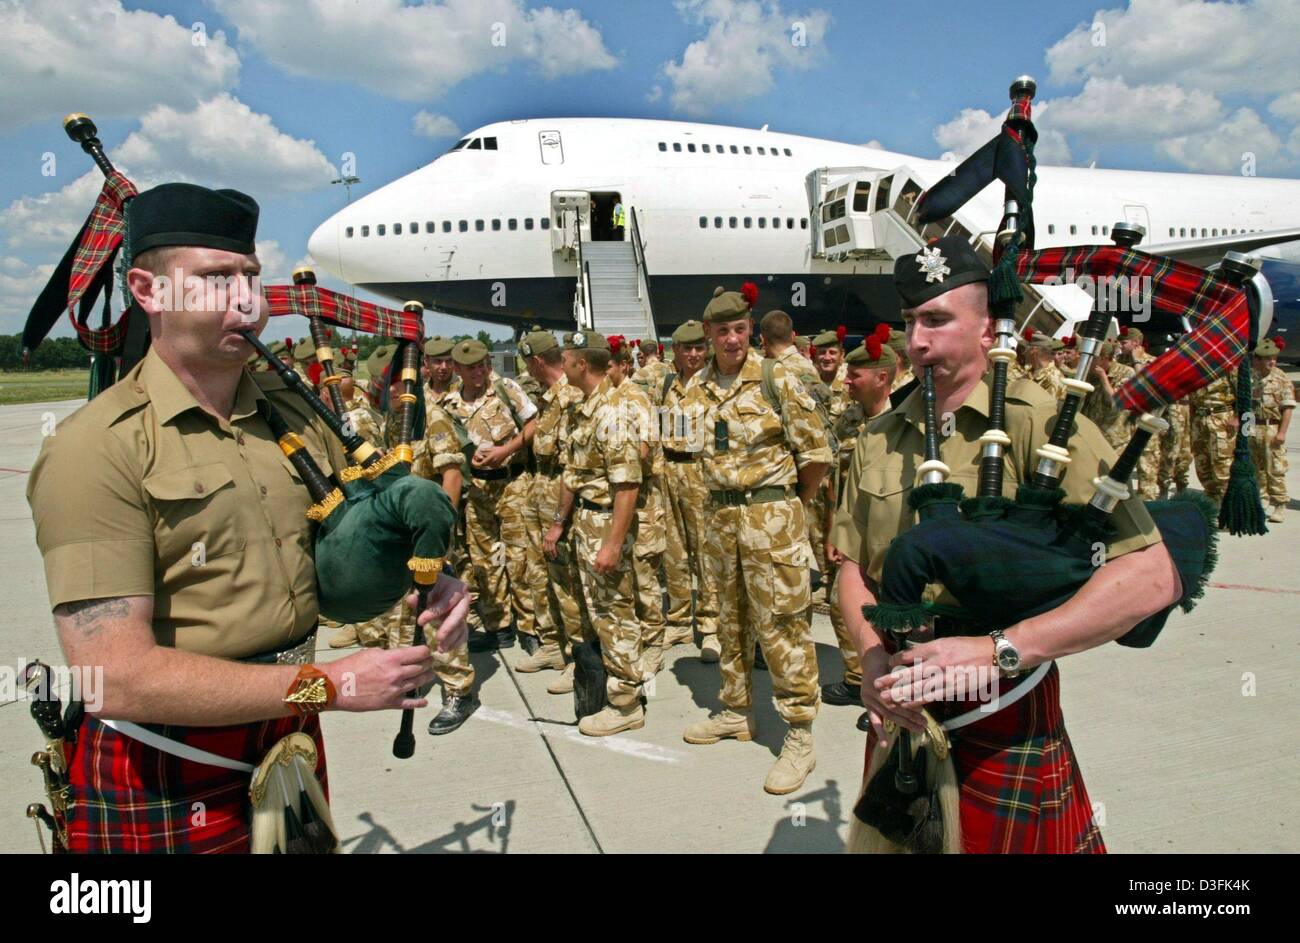 (dpa) - The so-called Desert Rats are welcomed by two pipers at the airfield in Hanover, Germany, 27 June 2003. About 330 British soldiers returned from Iraq to their base in the German state of Lower Saxony. Altogether, about 12,000 troops which are stationed in Germany were fighting in Iraq. They are completely to withdraw from Iraq by mid-July. Stock Photo